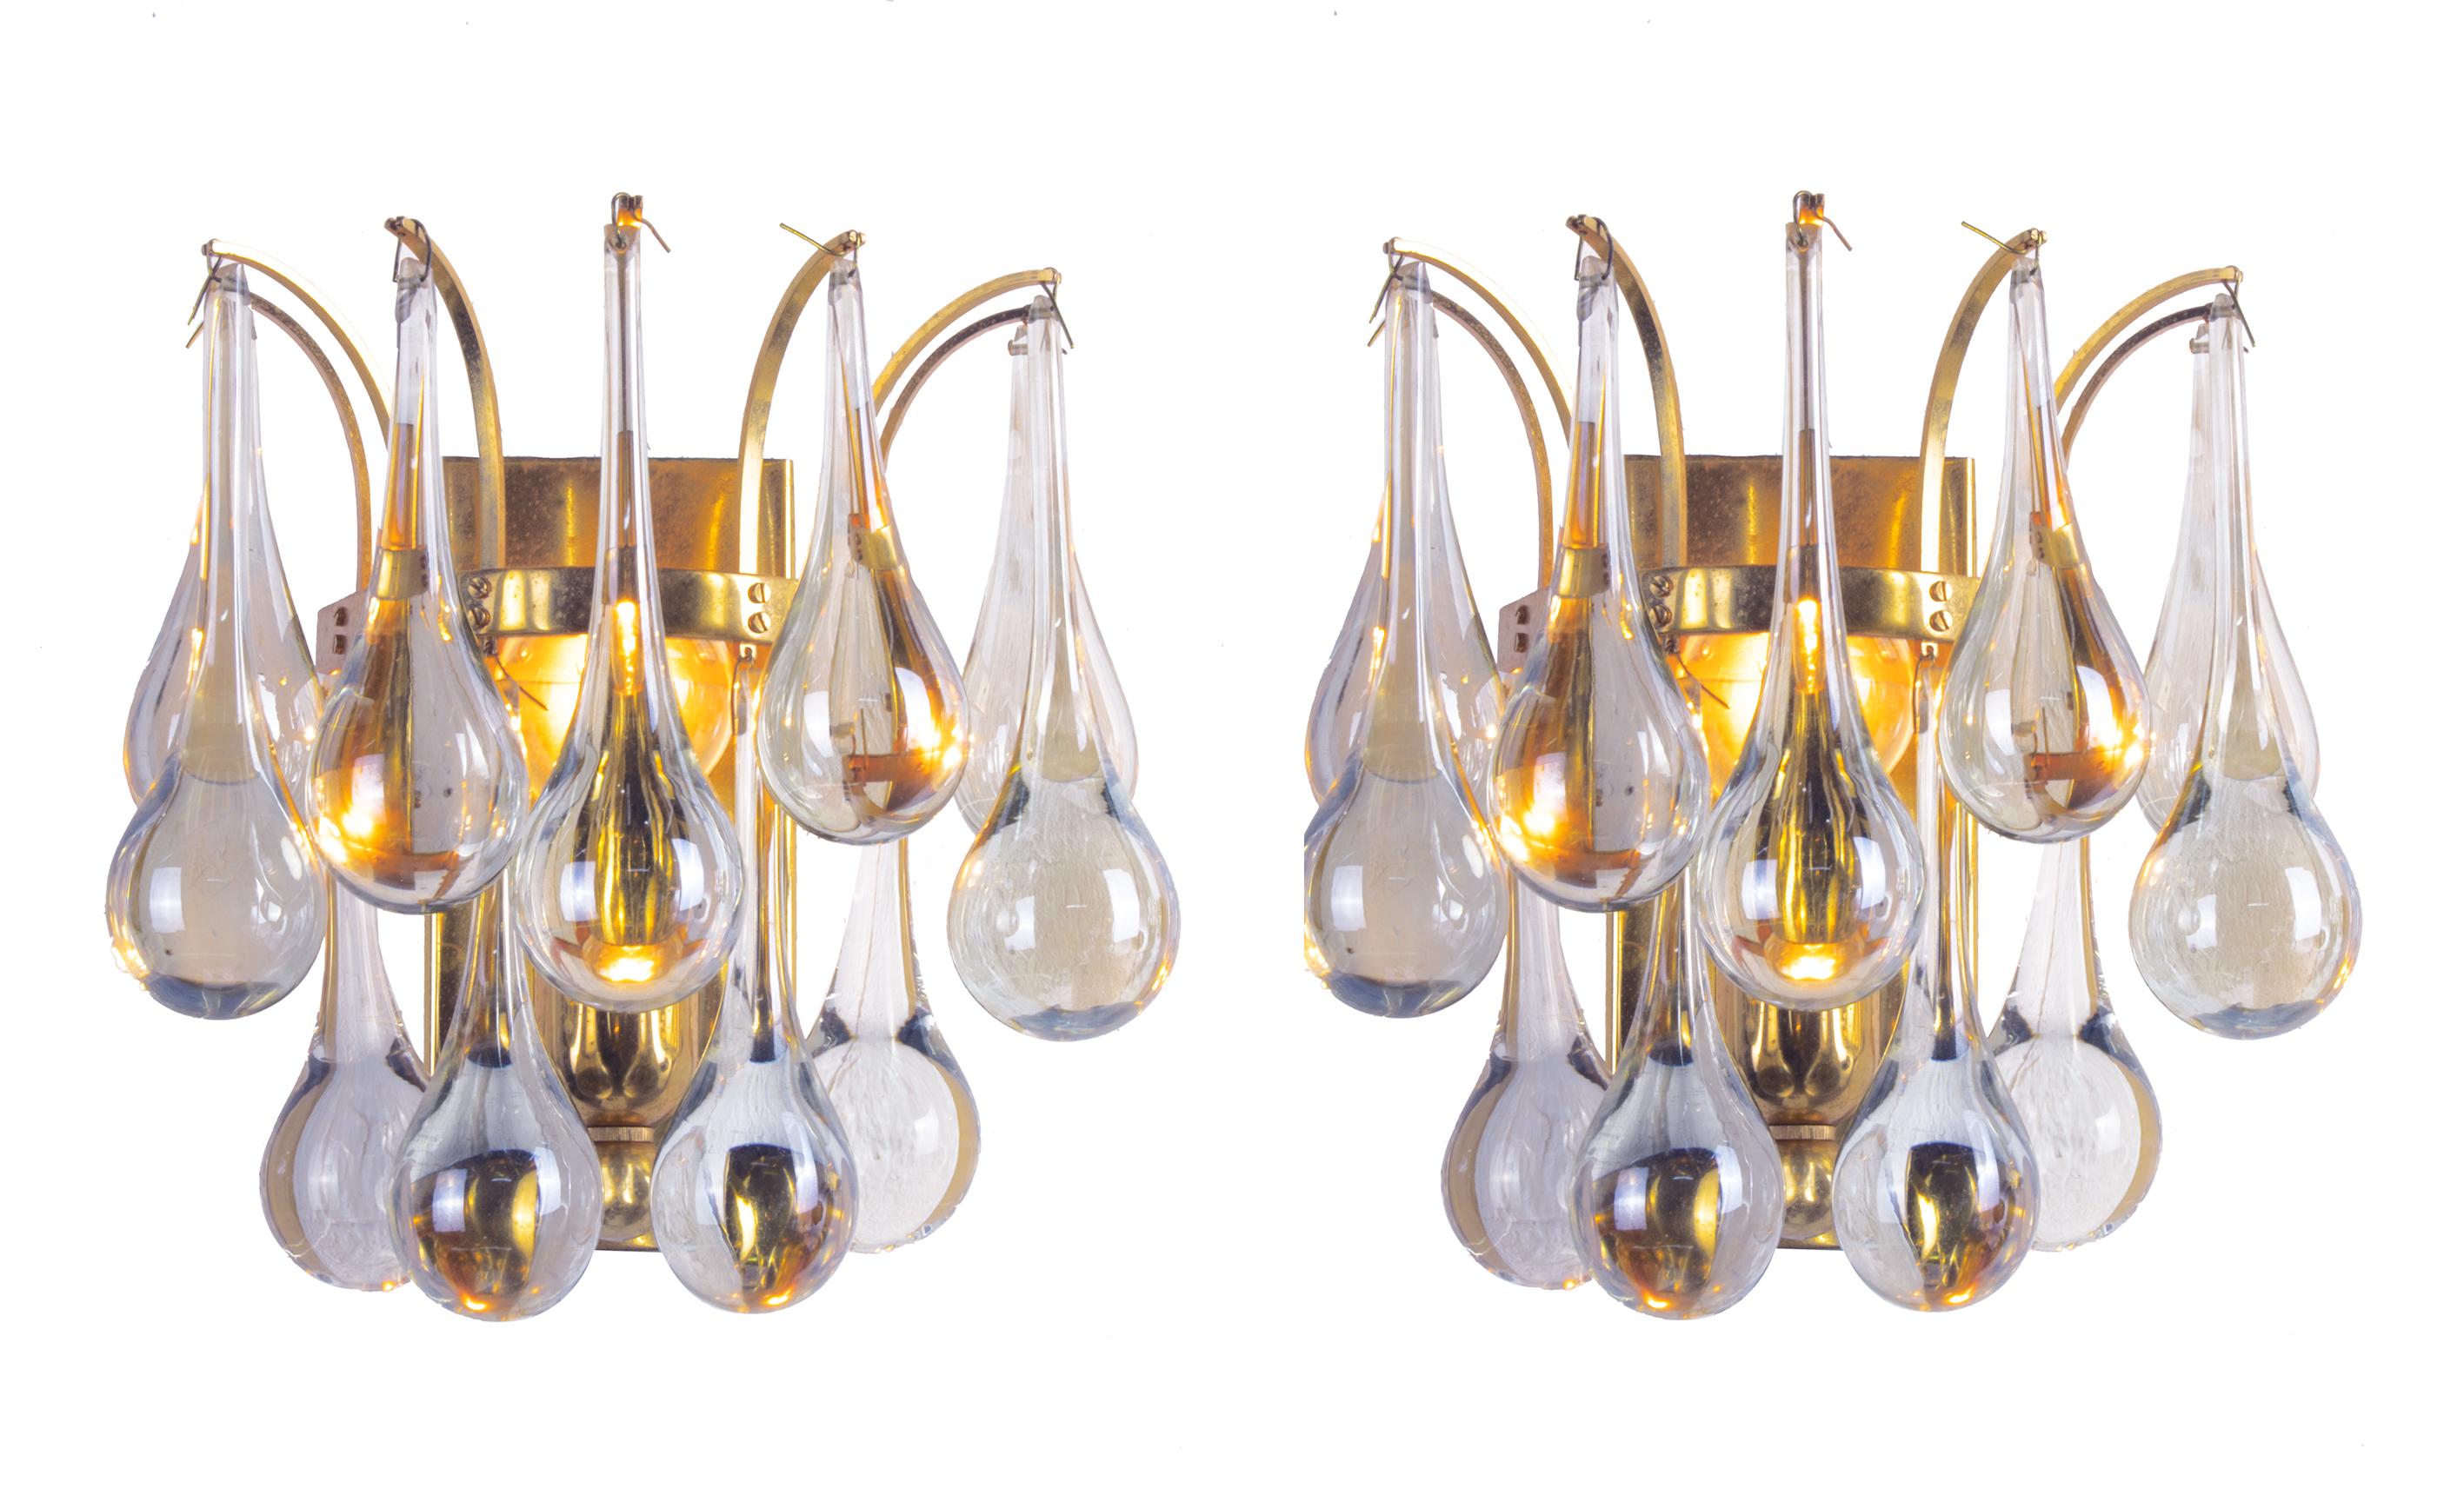 Elegant pair of wall sconces with a gold-plated brass frame and Murano glass teardrops. These lamps have an incomparable unique character. A touch of luxury fills the room. 
Manufacturer: Palwa, Palme & Walter, Germany, 1960s. 
Measures: height